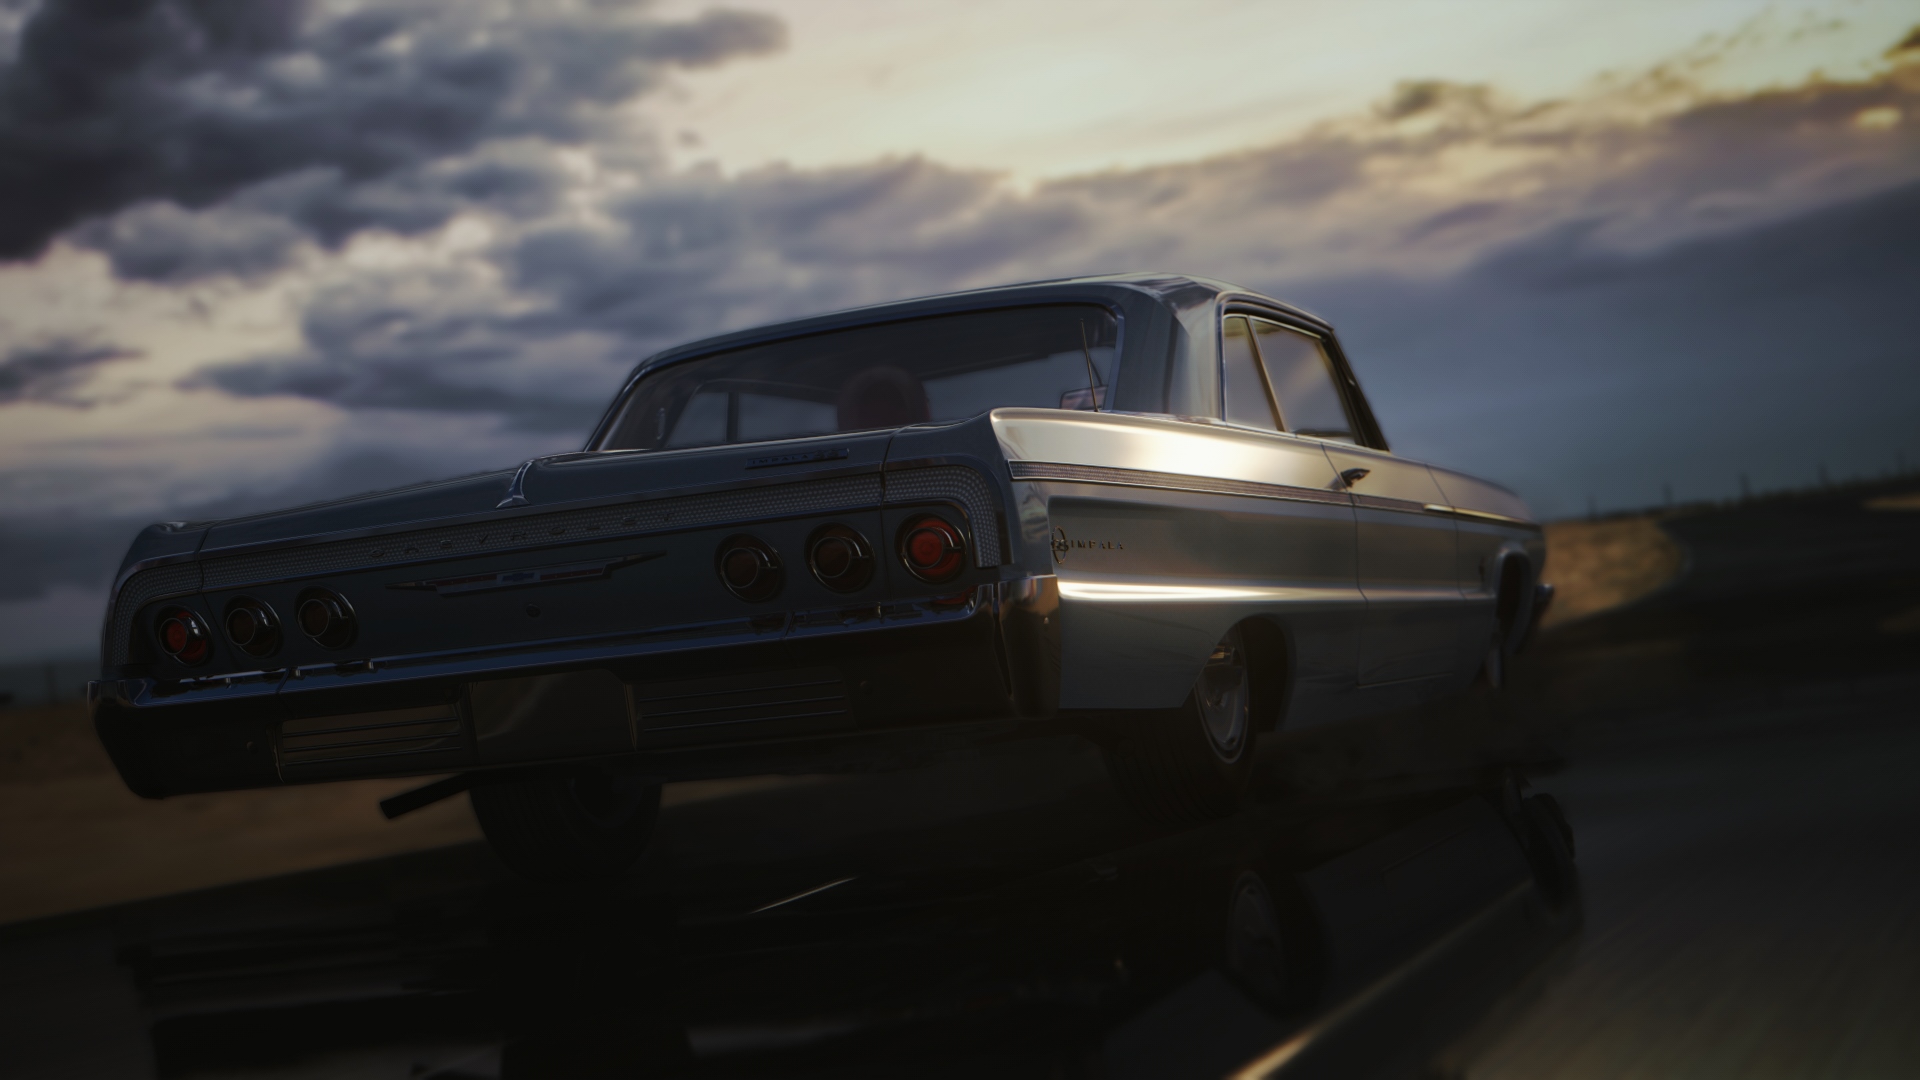 Assetto Corsa Chevrolet Impala Willow Springs by Wildart89